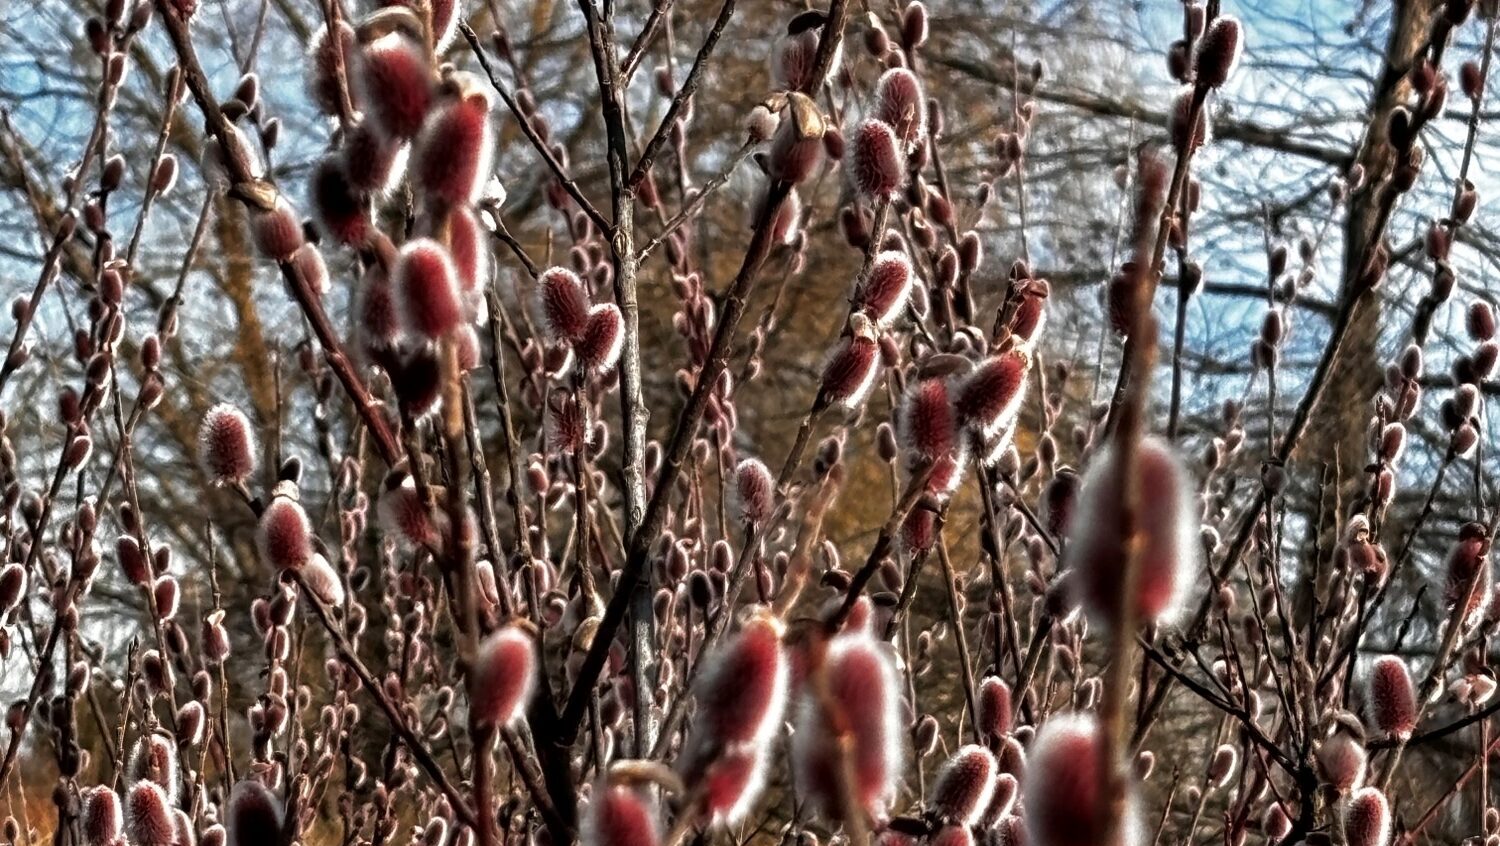 Pussy Willow catkins